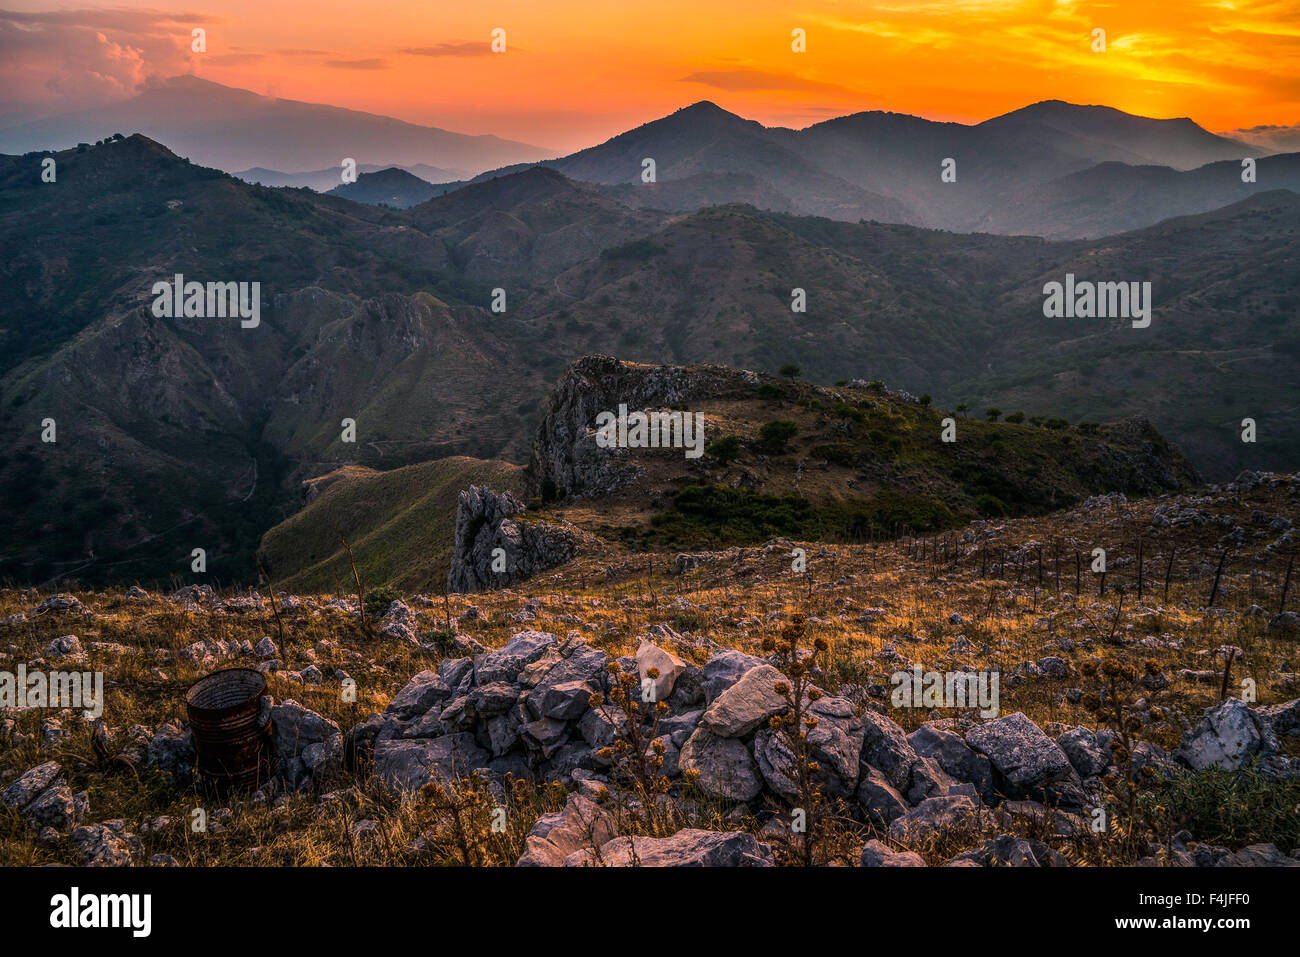 Italy Sicily Roccafiorita The spectacular scenery of the Peloritans in Sicily. The colors of the evening evoke the silence of nature. Stock Photo